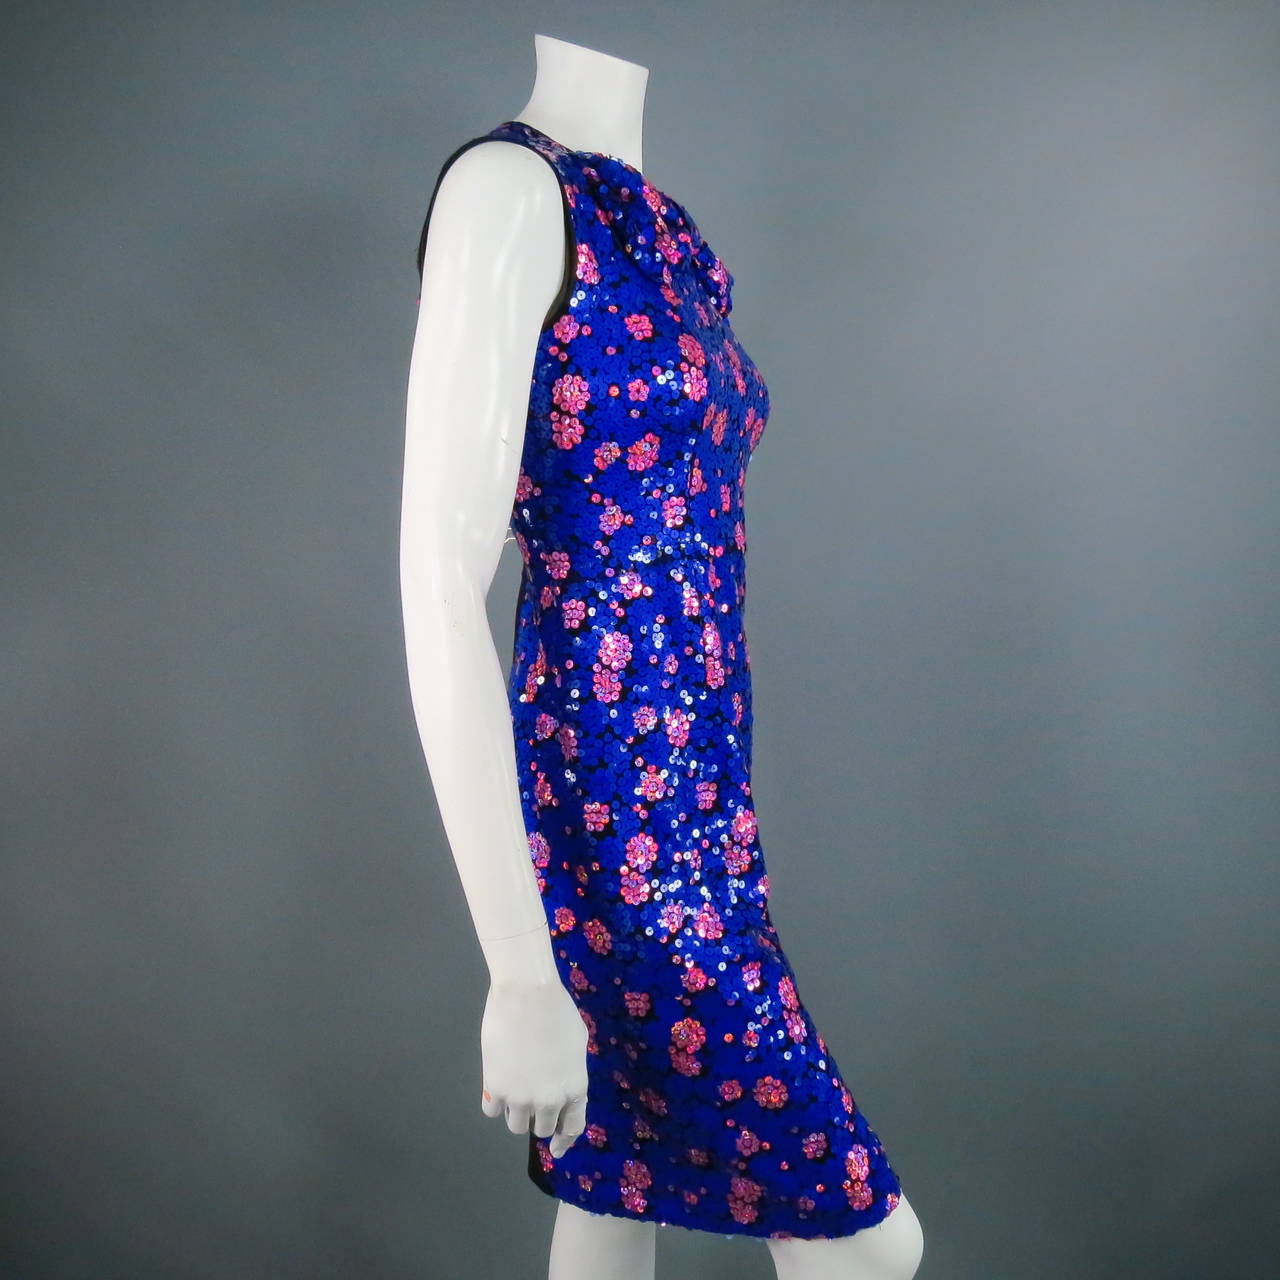 Flirty sequined silk cocktail dress by MARC JACOBS. A fun 1960's mod inspired sleeveless style in royal blue and pink print featuring a large bow detail along the neckline.  Retail at $2700
 
Excellent Pre-Owned Condition.
 
Measurements:
Shoulder: